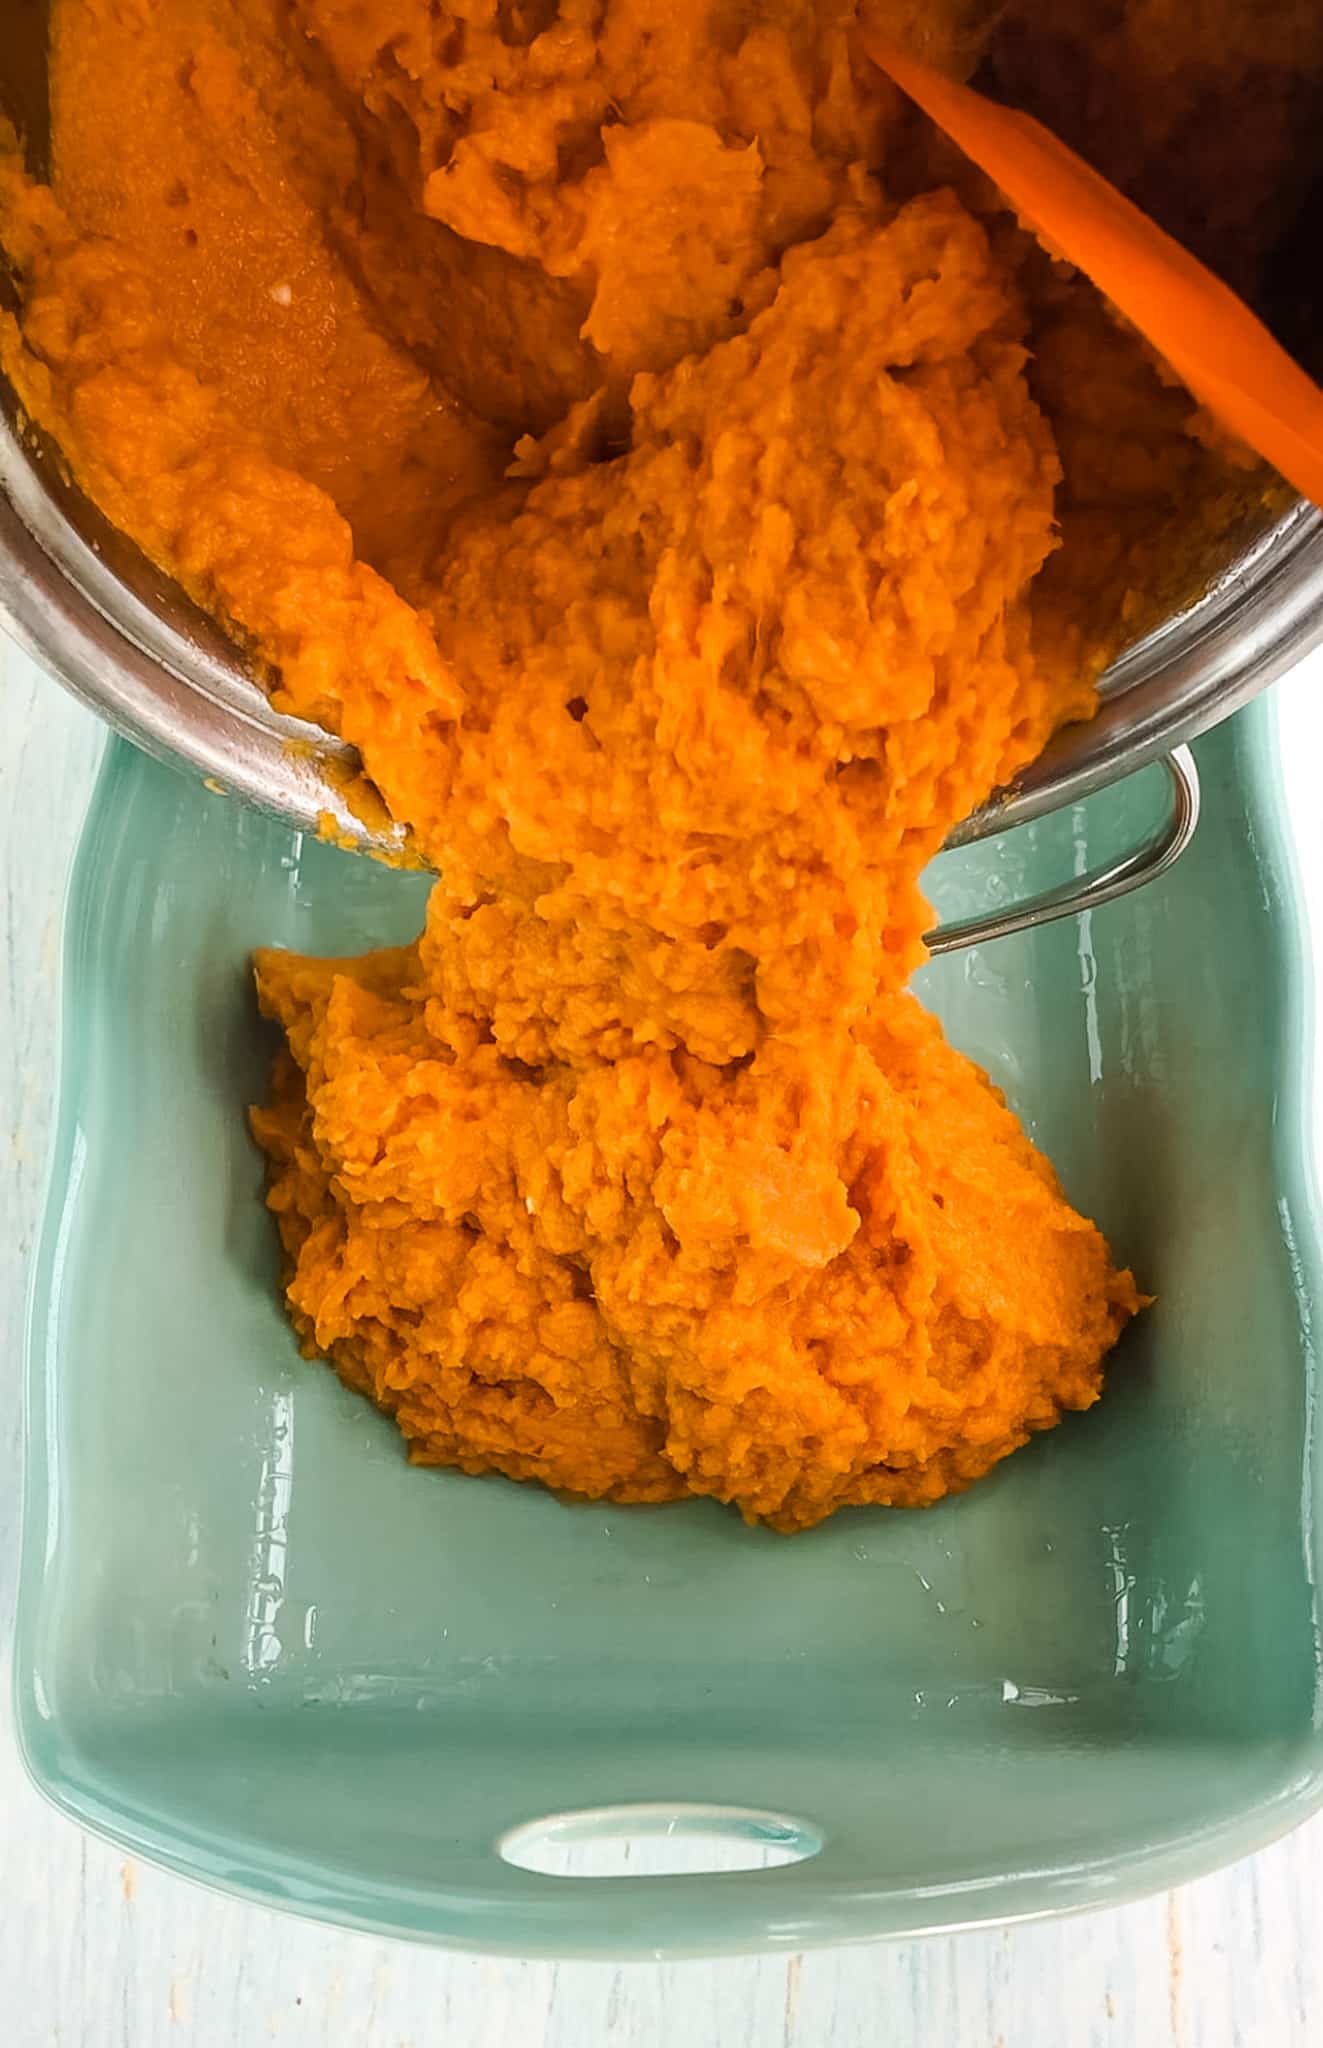 Mashed sweet potatoes being poured into a casserole dish.